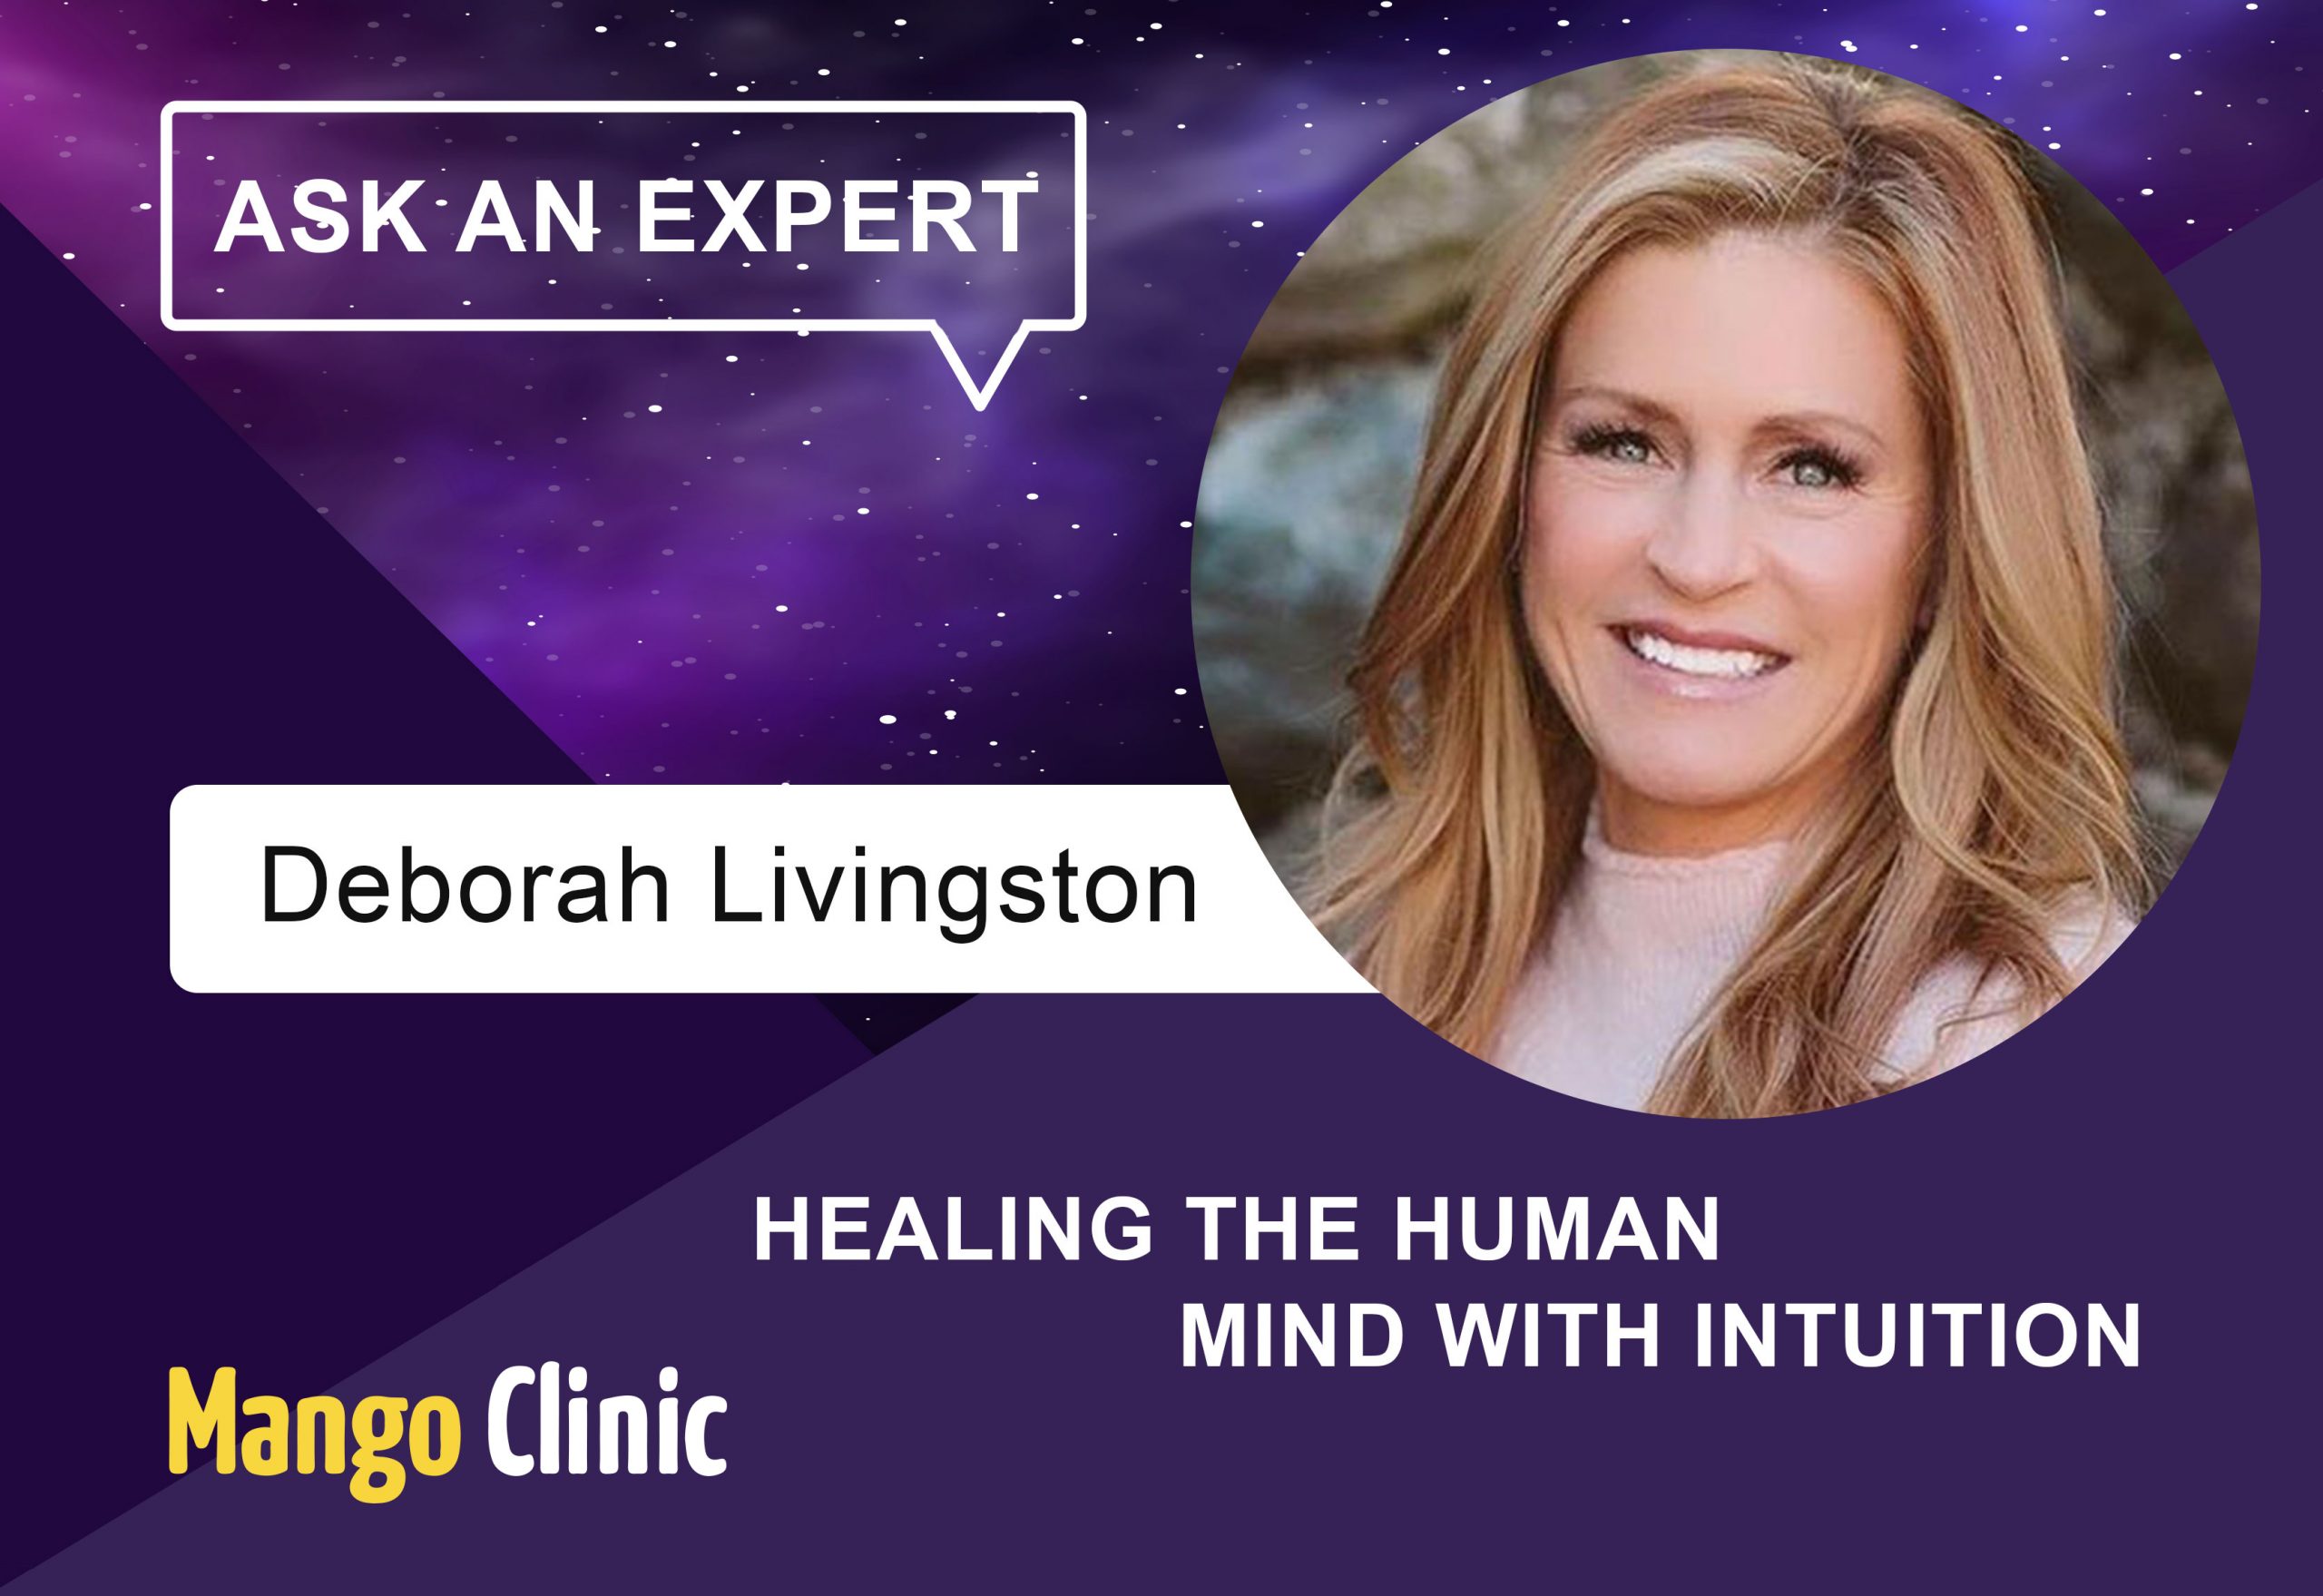 Healing the Human Mind With Intuition: Featuring Deborah Livingston